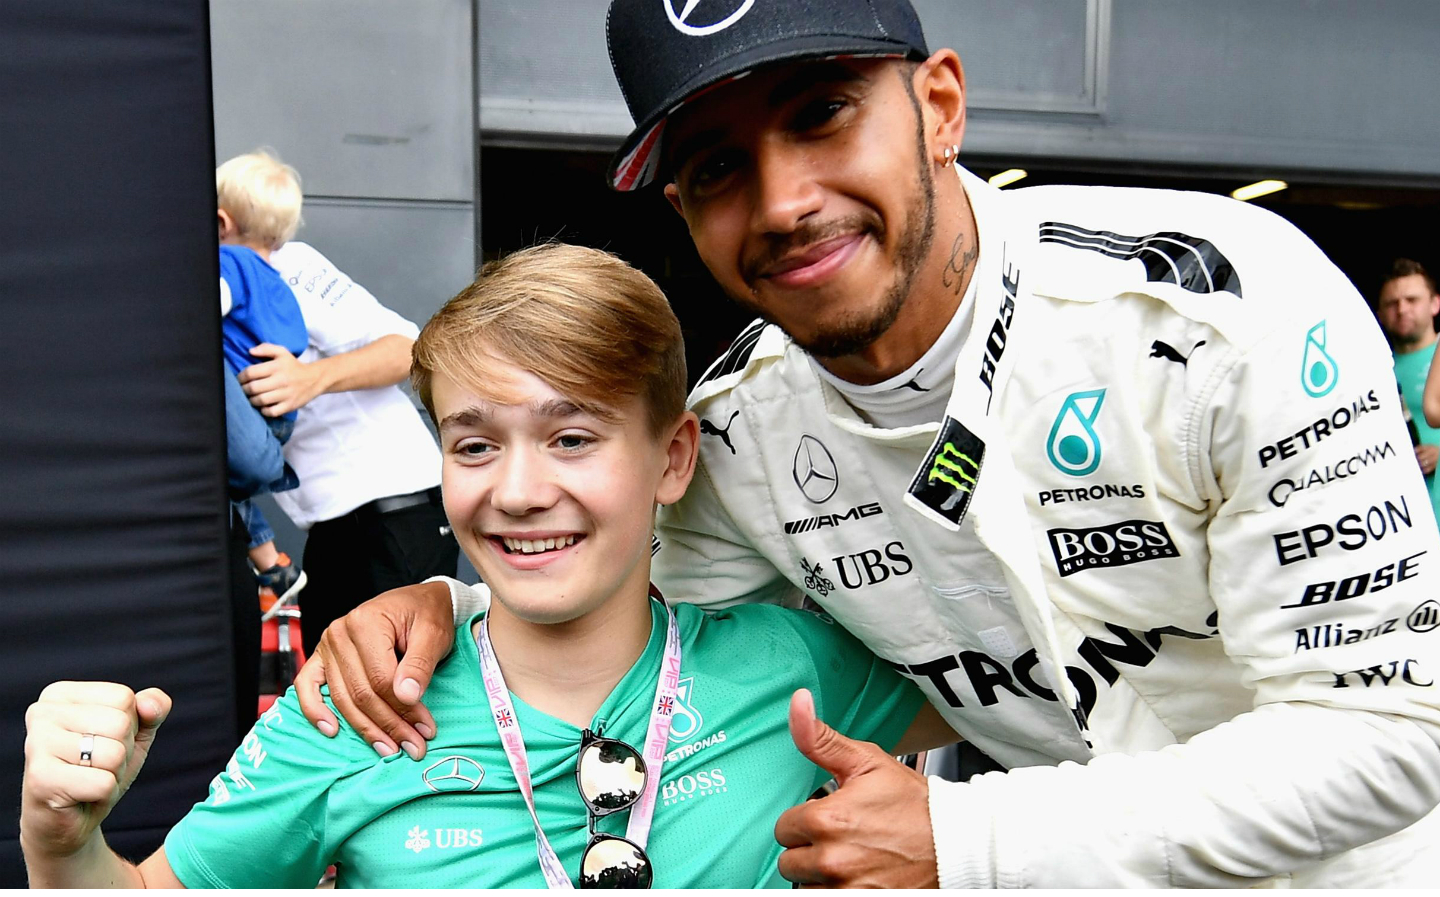 Billy Monger is dreaming of F1 — and jeans that fit